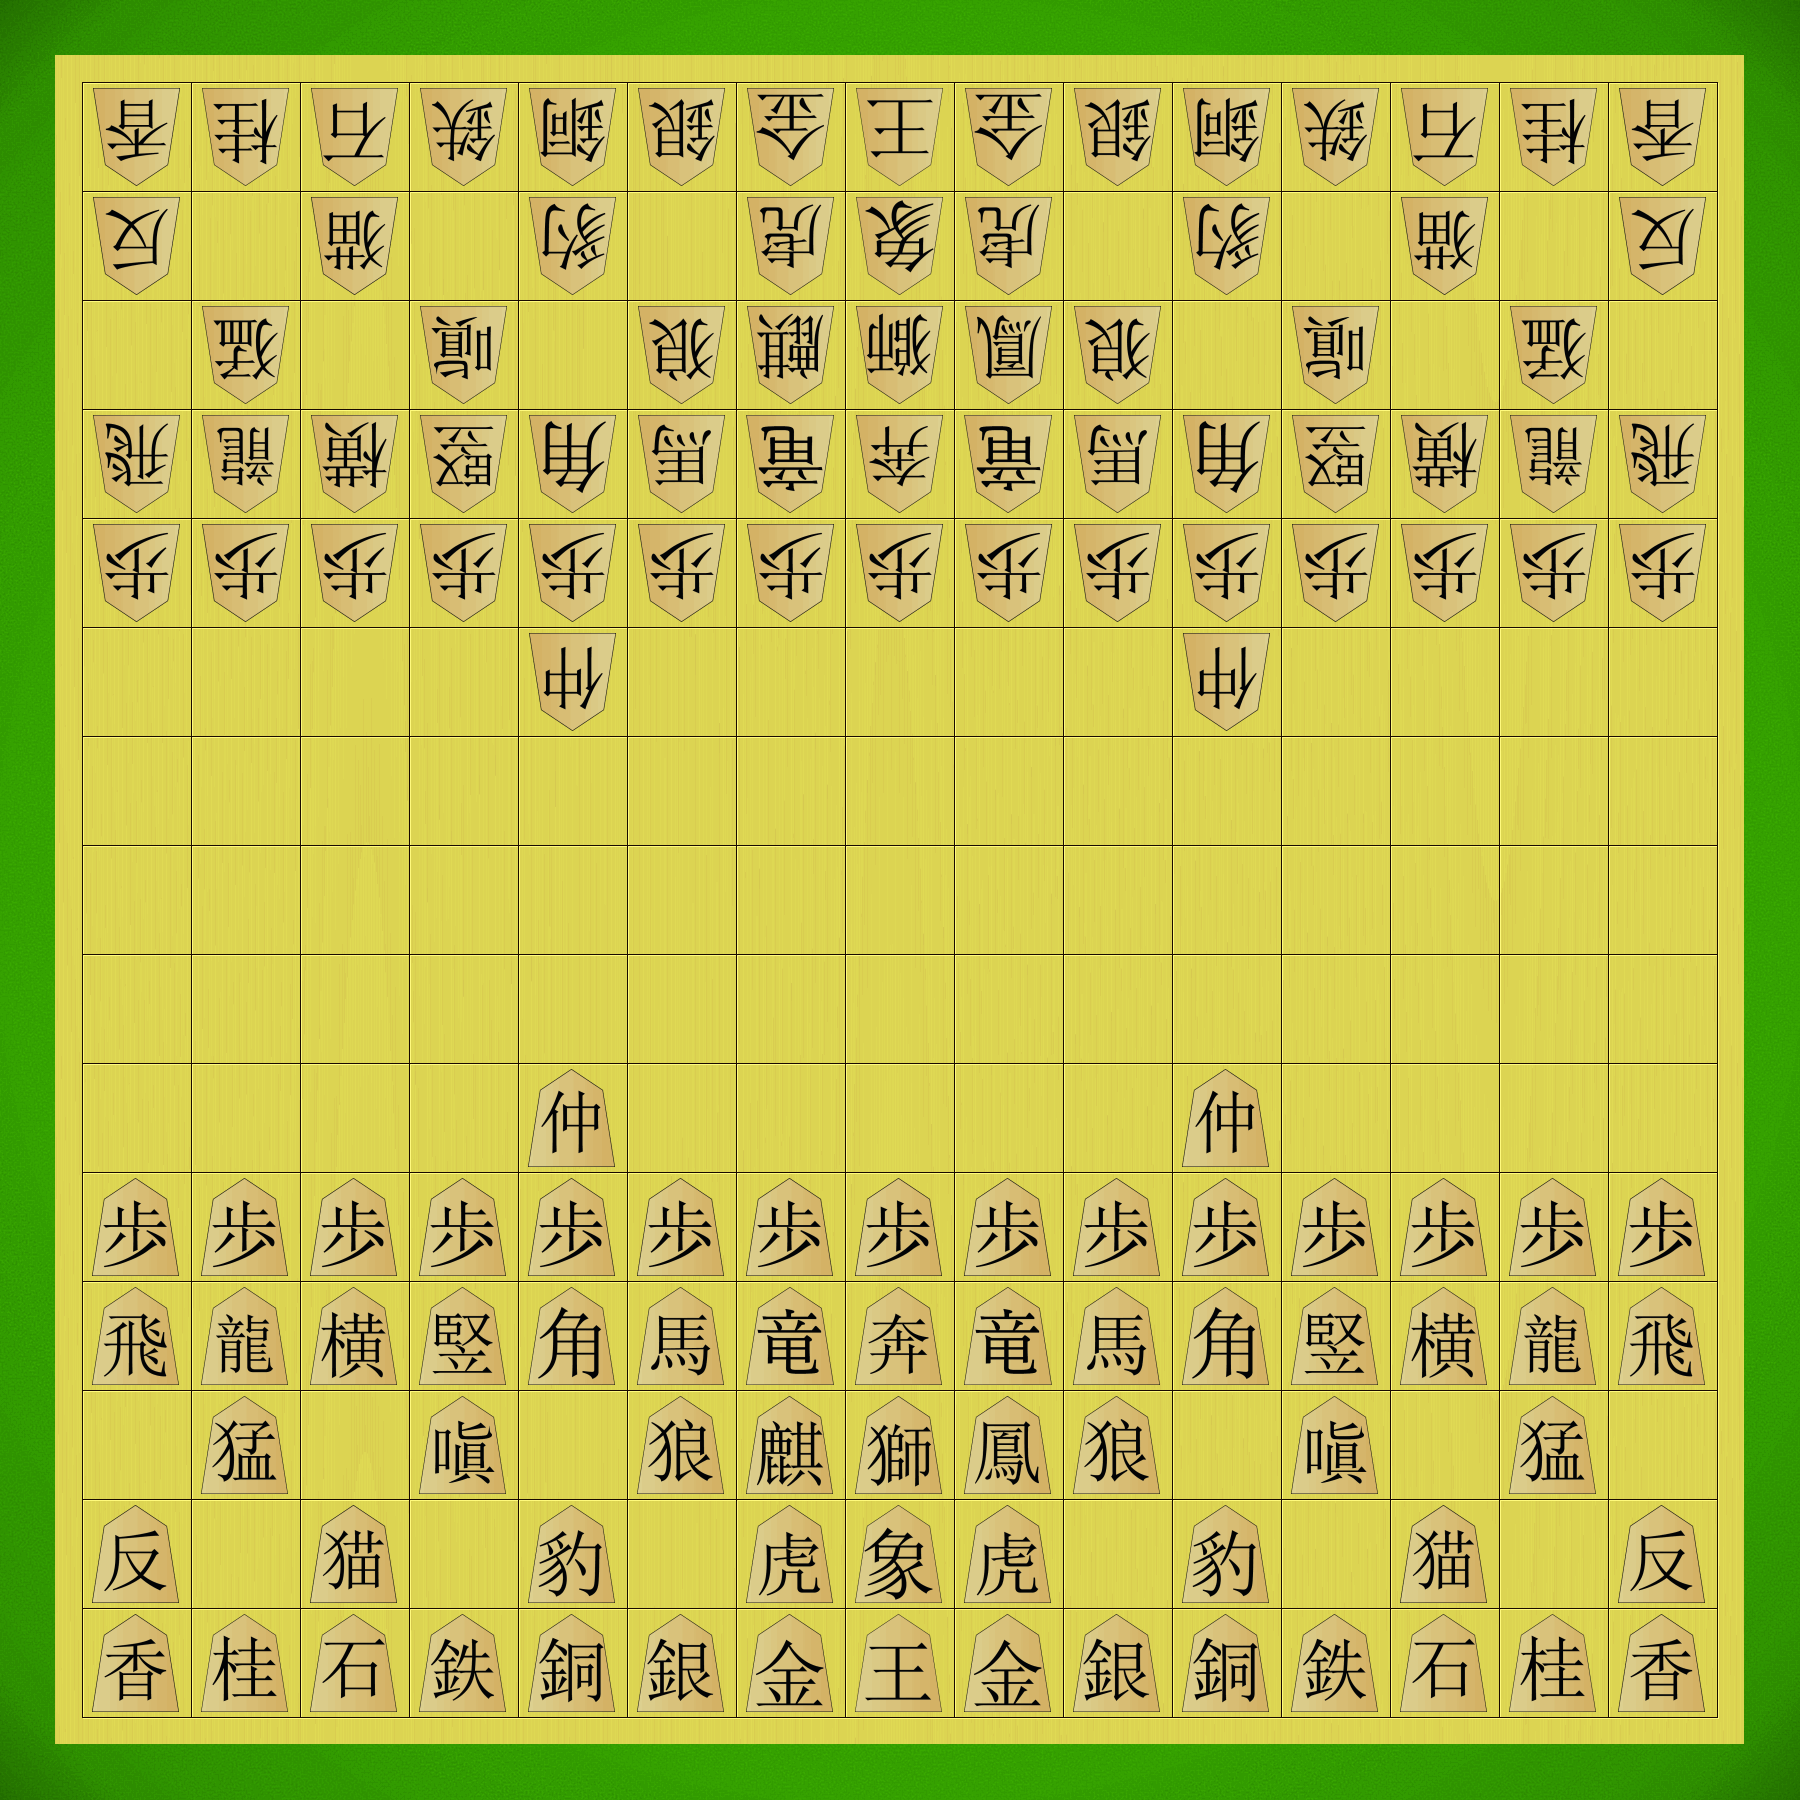 Shogi and some variants now available in Ai Ai — play against AI or online!